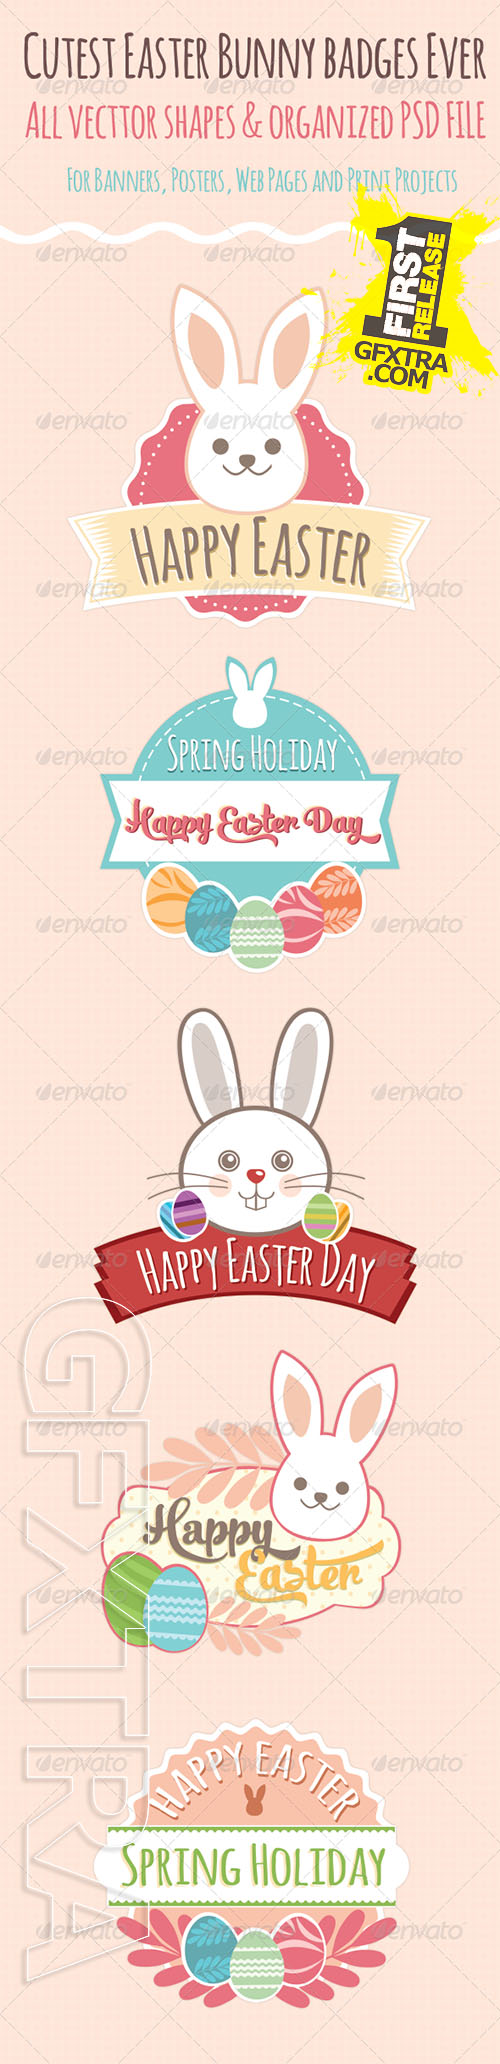 GraphicRiver - Easter Badges 7383626